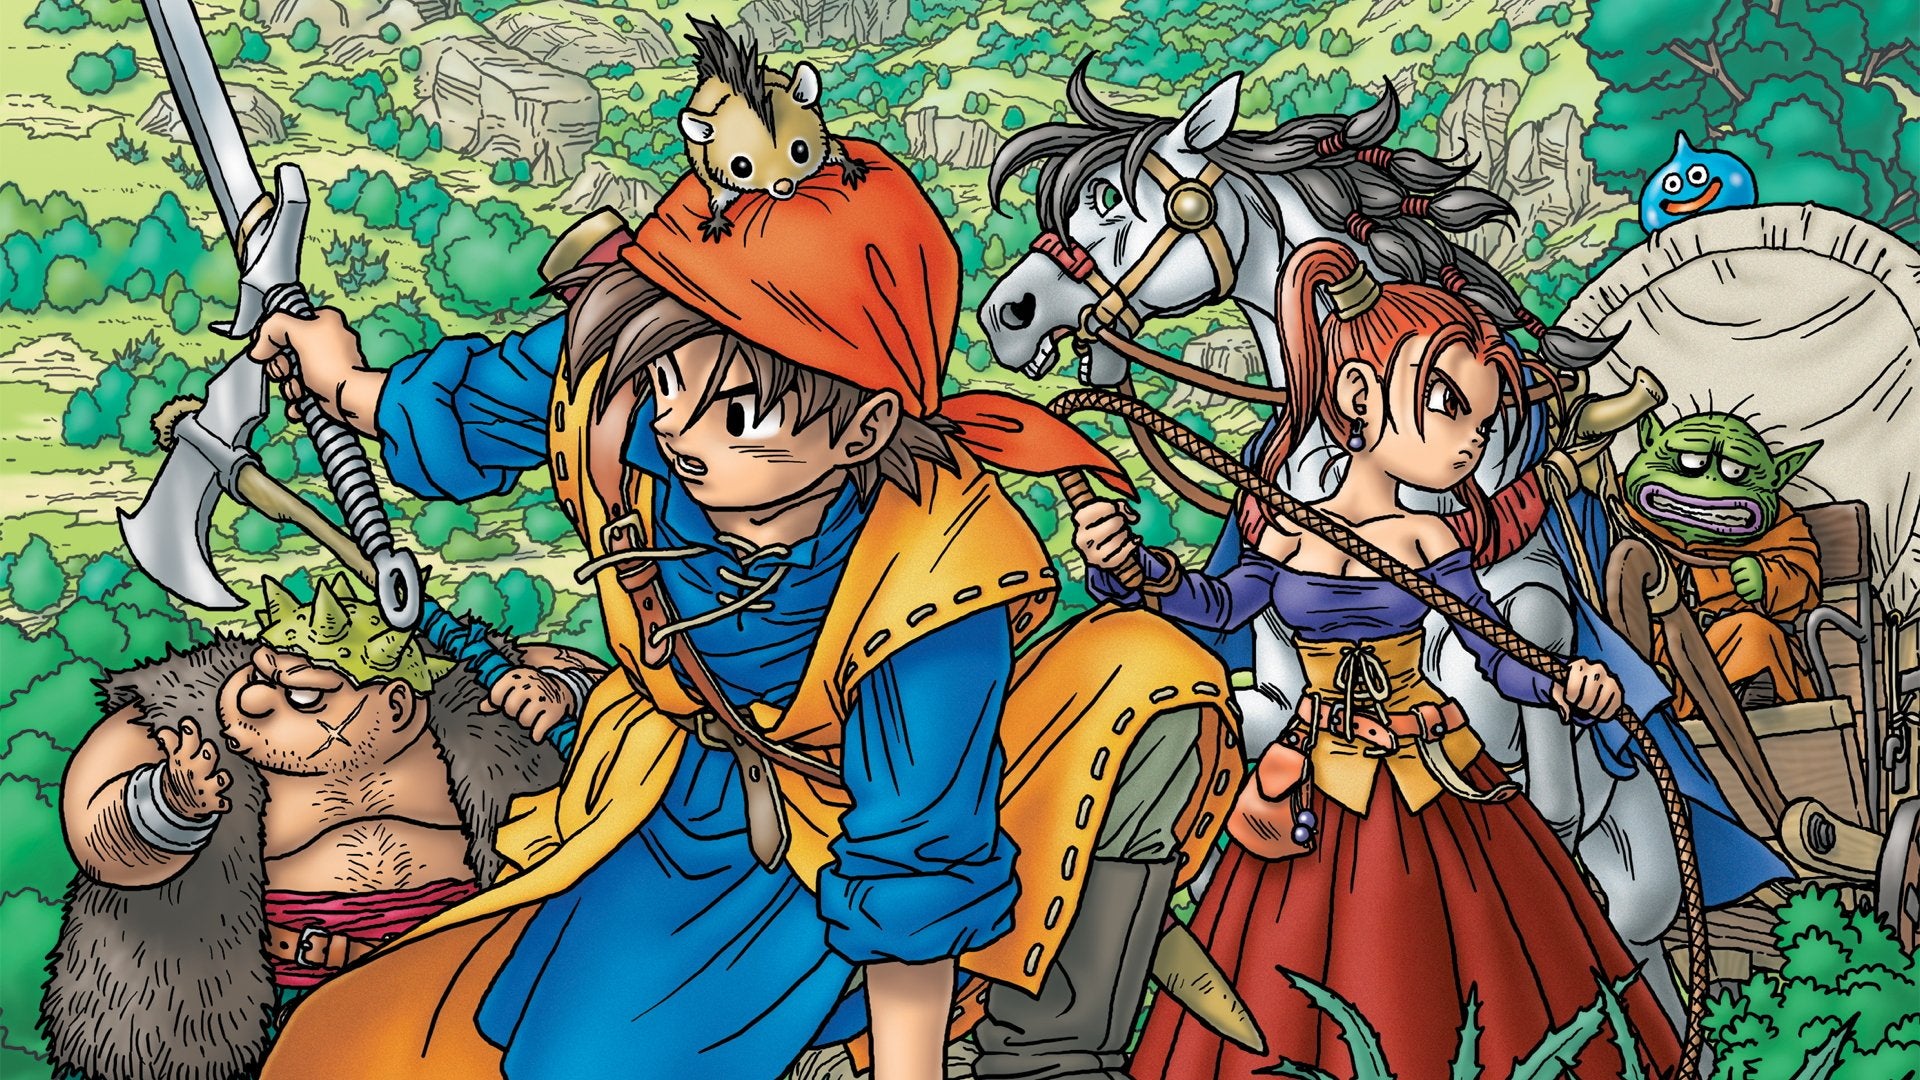 Dårlig faktor klik pilot We'll have to wait until next year to play Dragon Quest 8: Journey of the  Cursed King | VG247